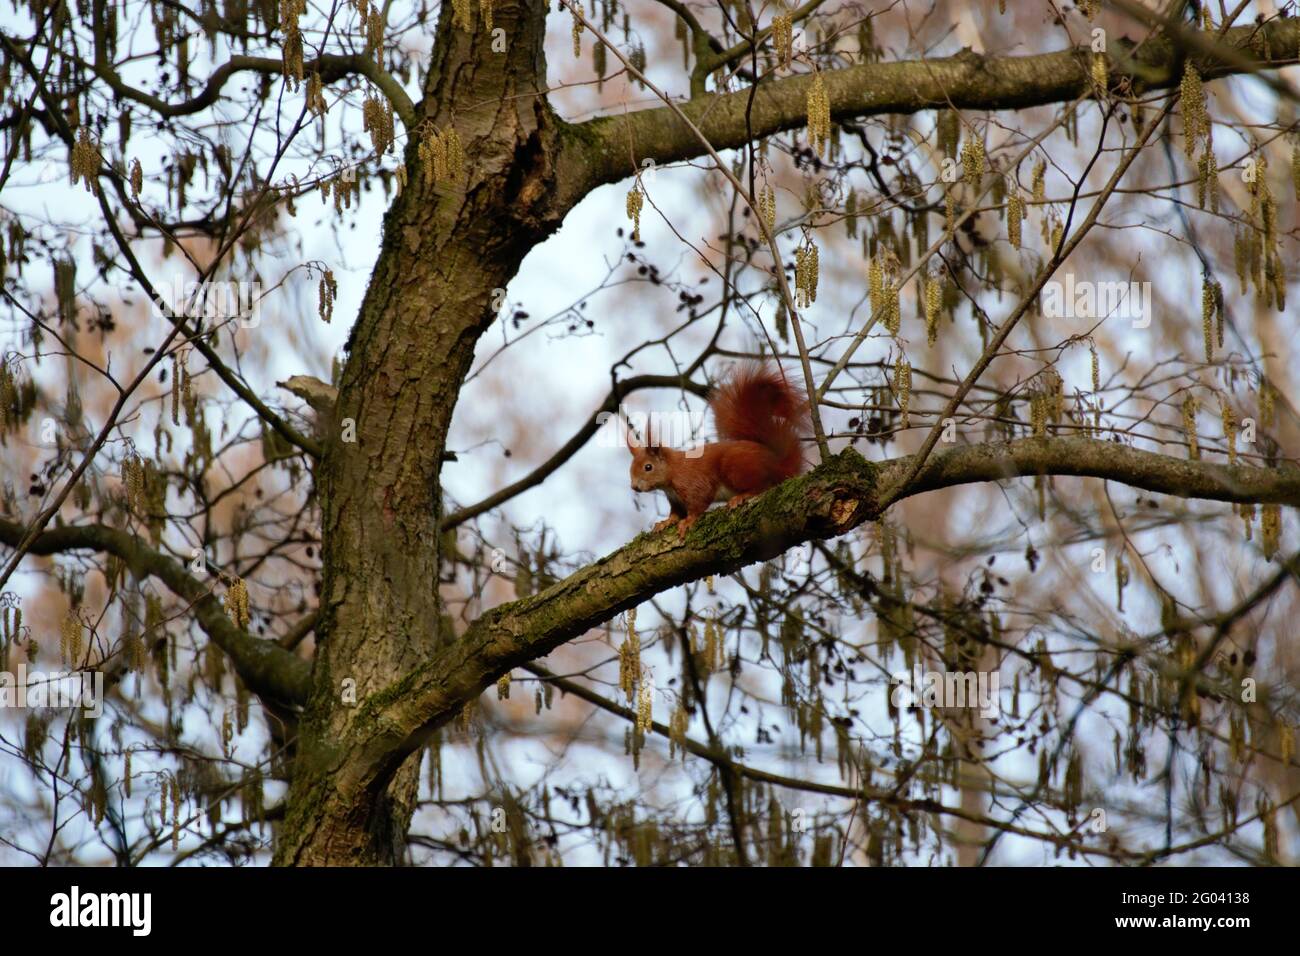 Red squirel on a tree Stock Photo